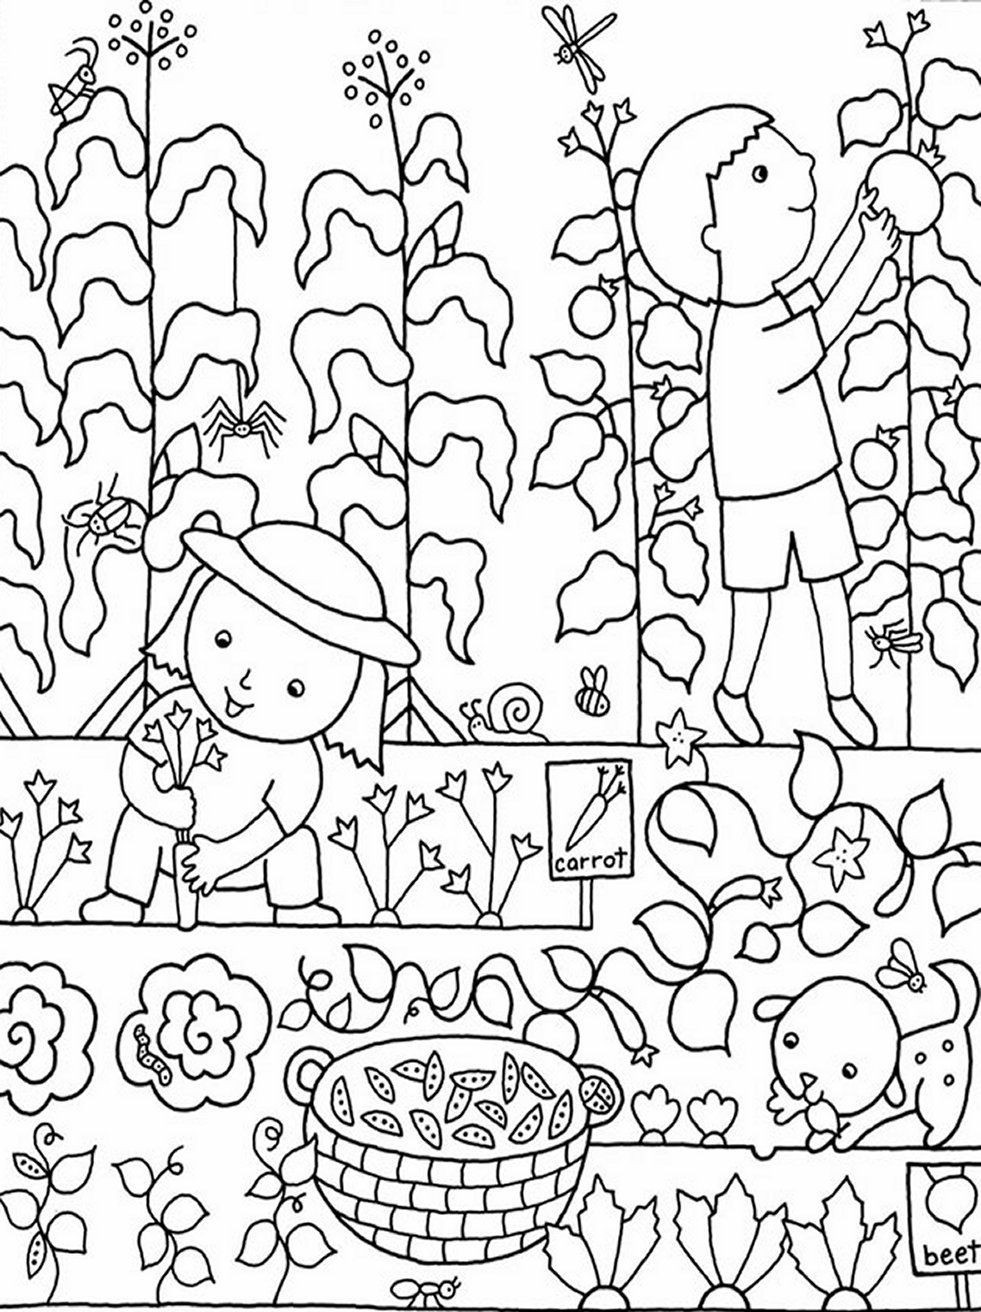 Garden Coloring Pages For Kids
 Kids Gardening Coloring Pages Free Colouring to